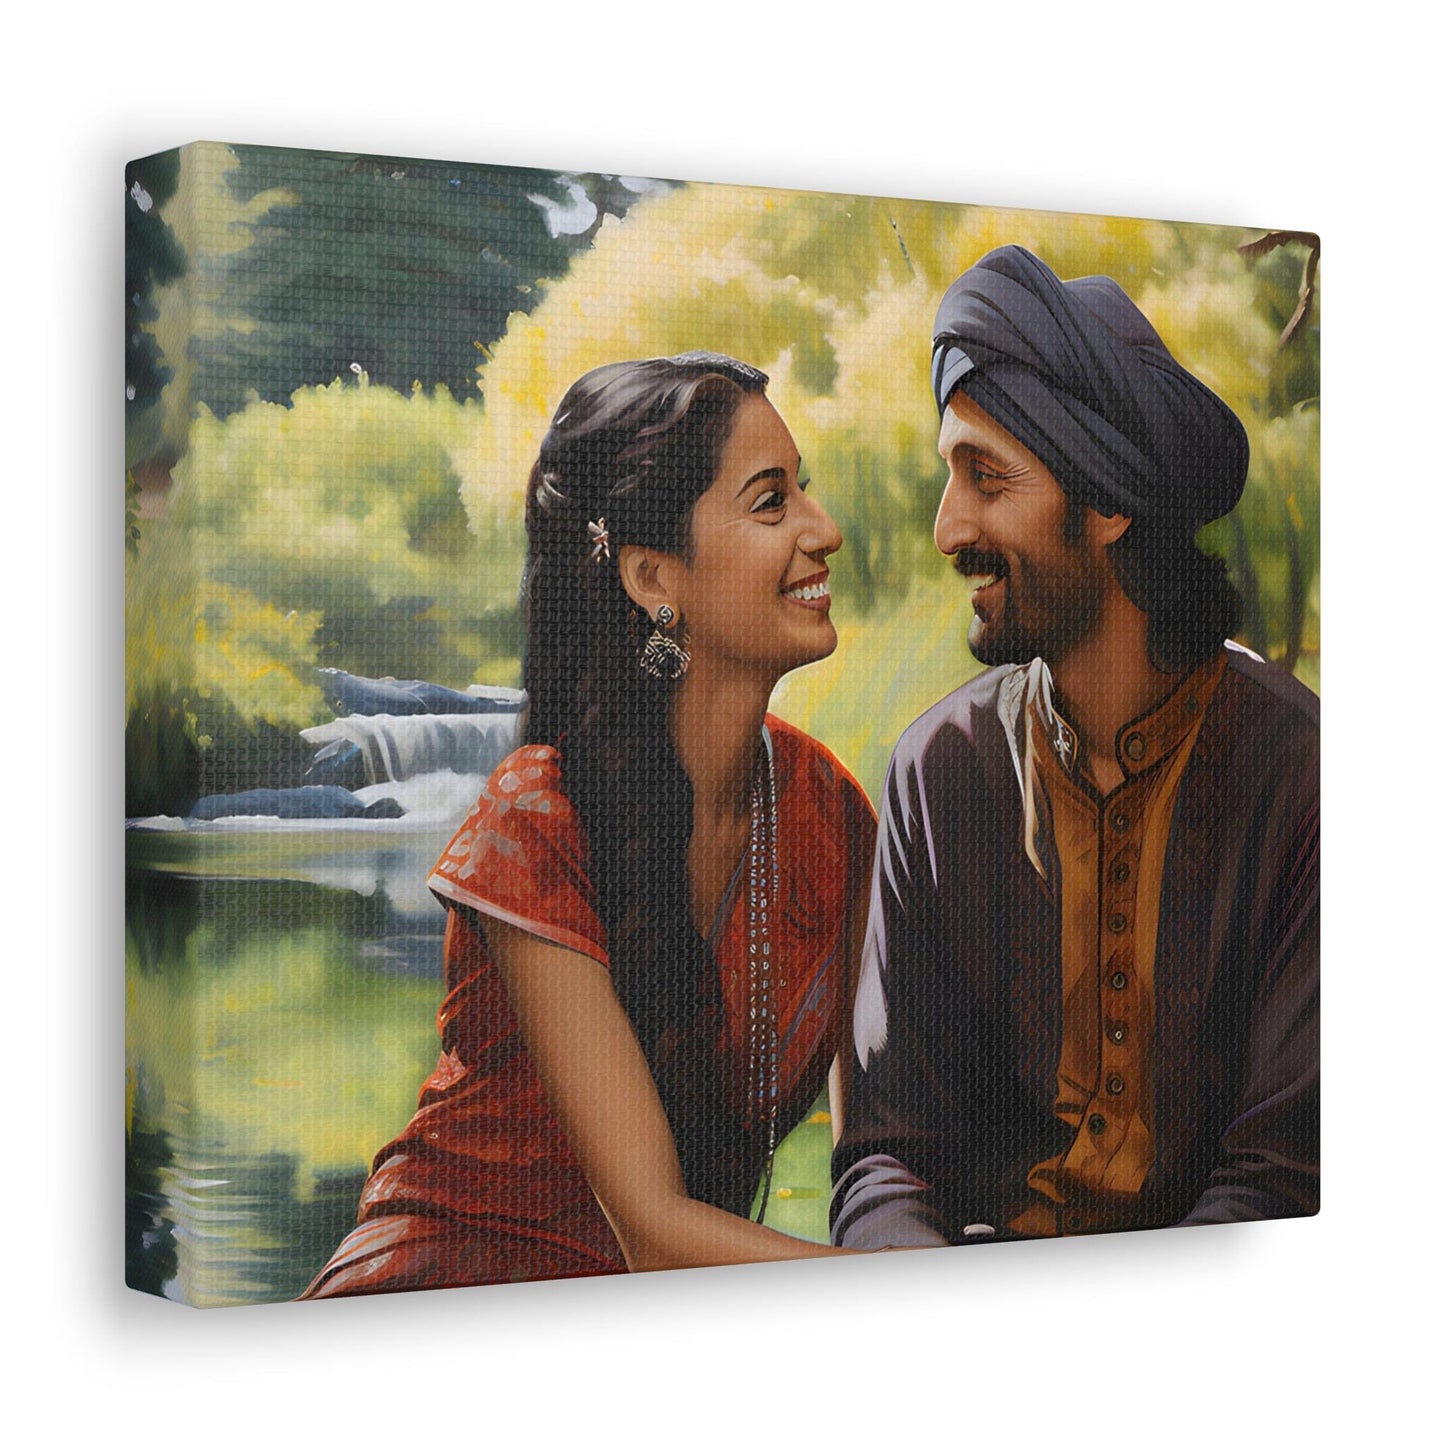 angle 2 Canvas by Aravind Patel depicting a young Indian couple enjoying a serene moment in a park, surrounded by tall trees and a reflective pond, capturing the essence of romantic serenity.